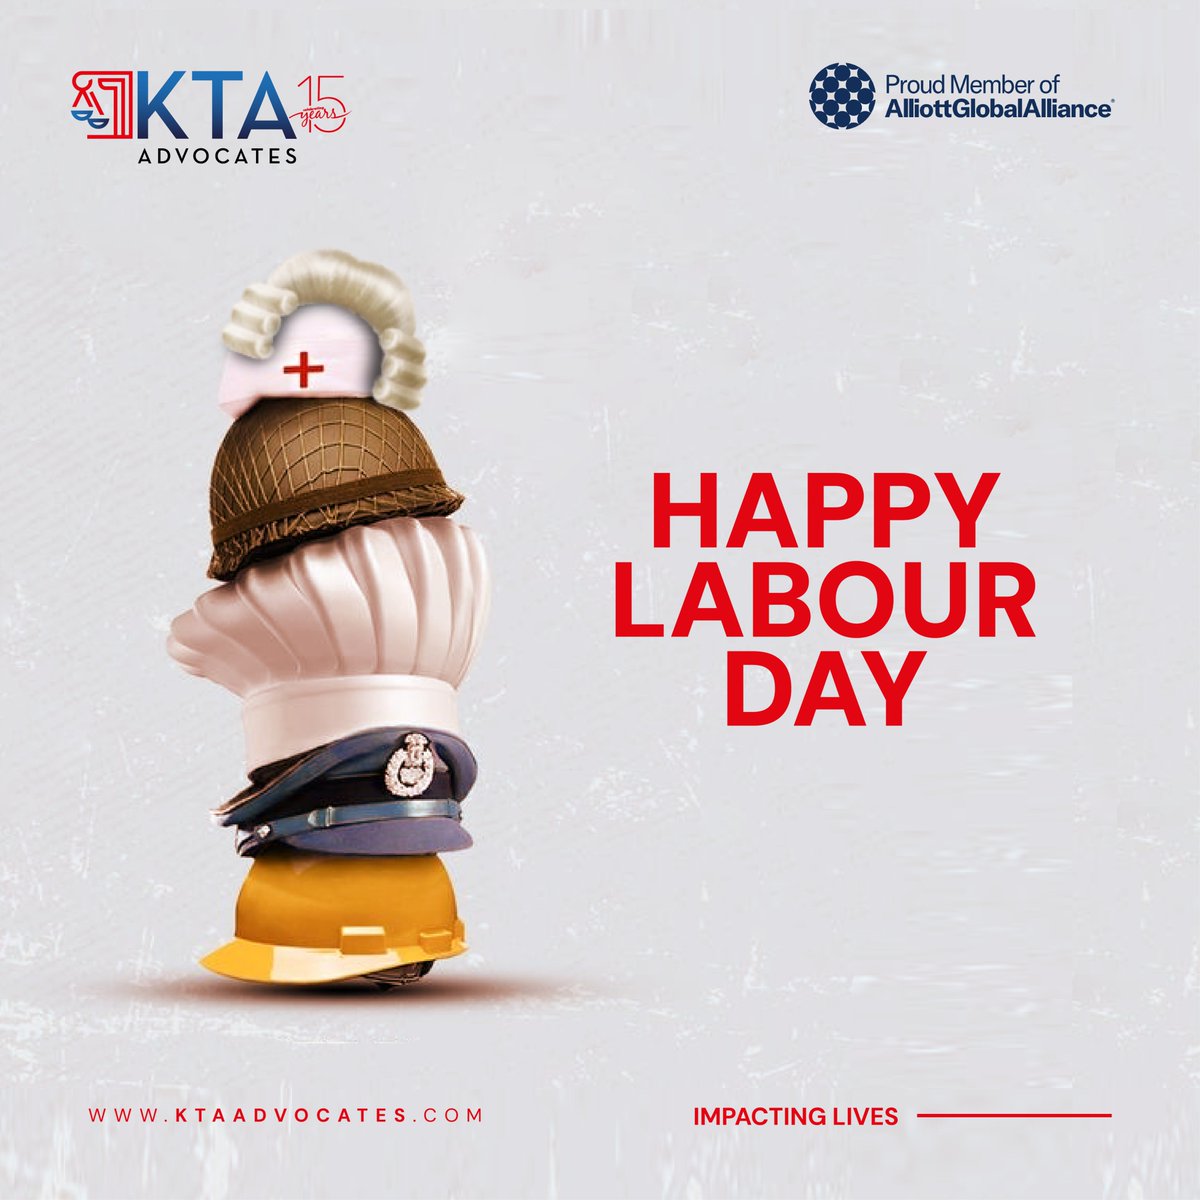 On this International Workers’ Day, we recognize all diligent workers whose unwavering commitment drives progress and enriches our communities. 
Happy #LabourDay 

#KTAat15 #ImpactingLives